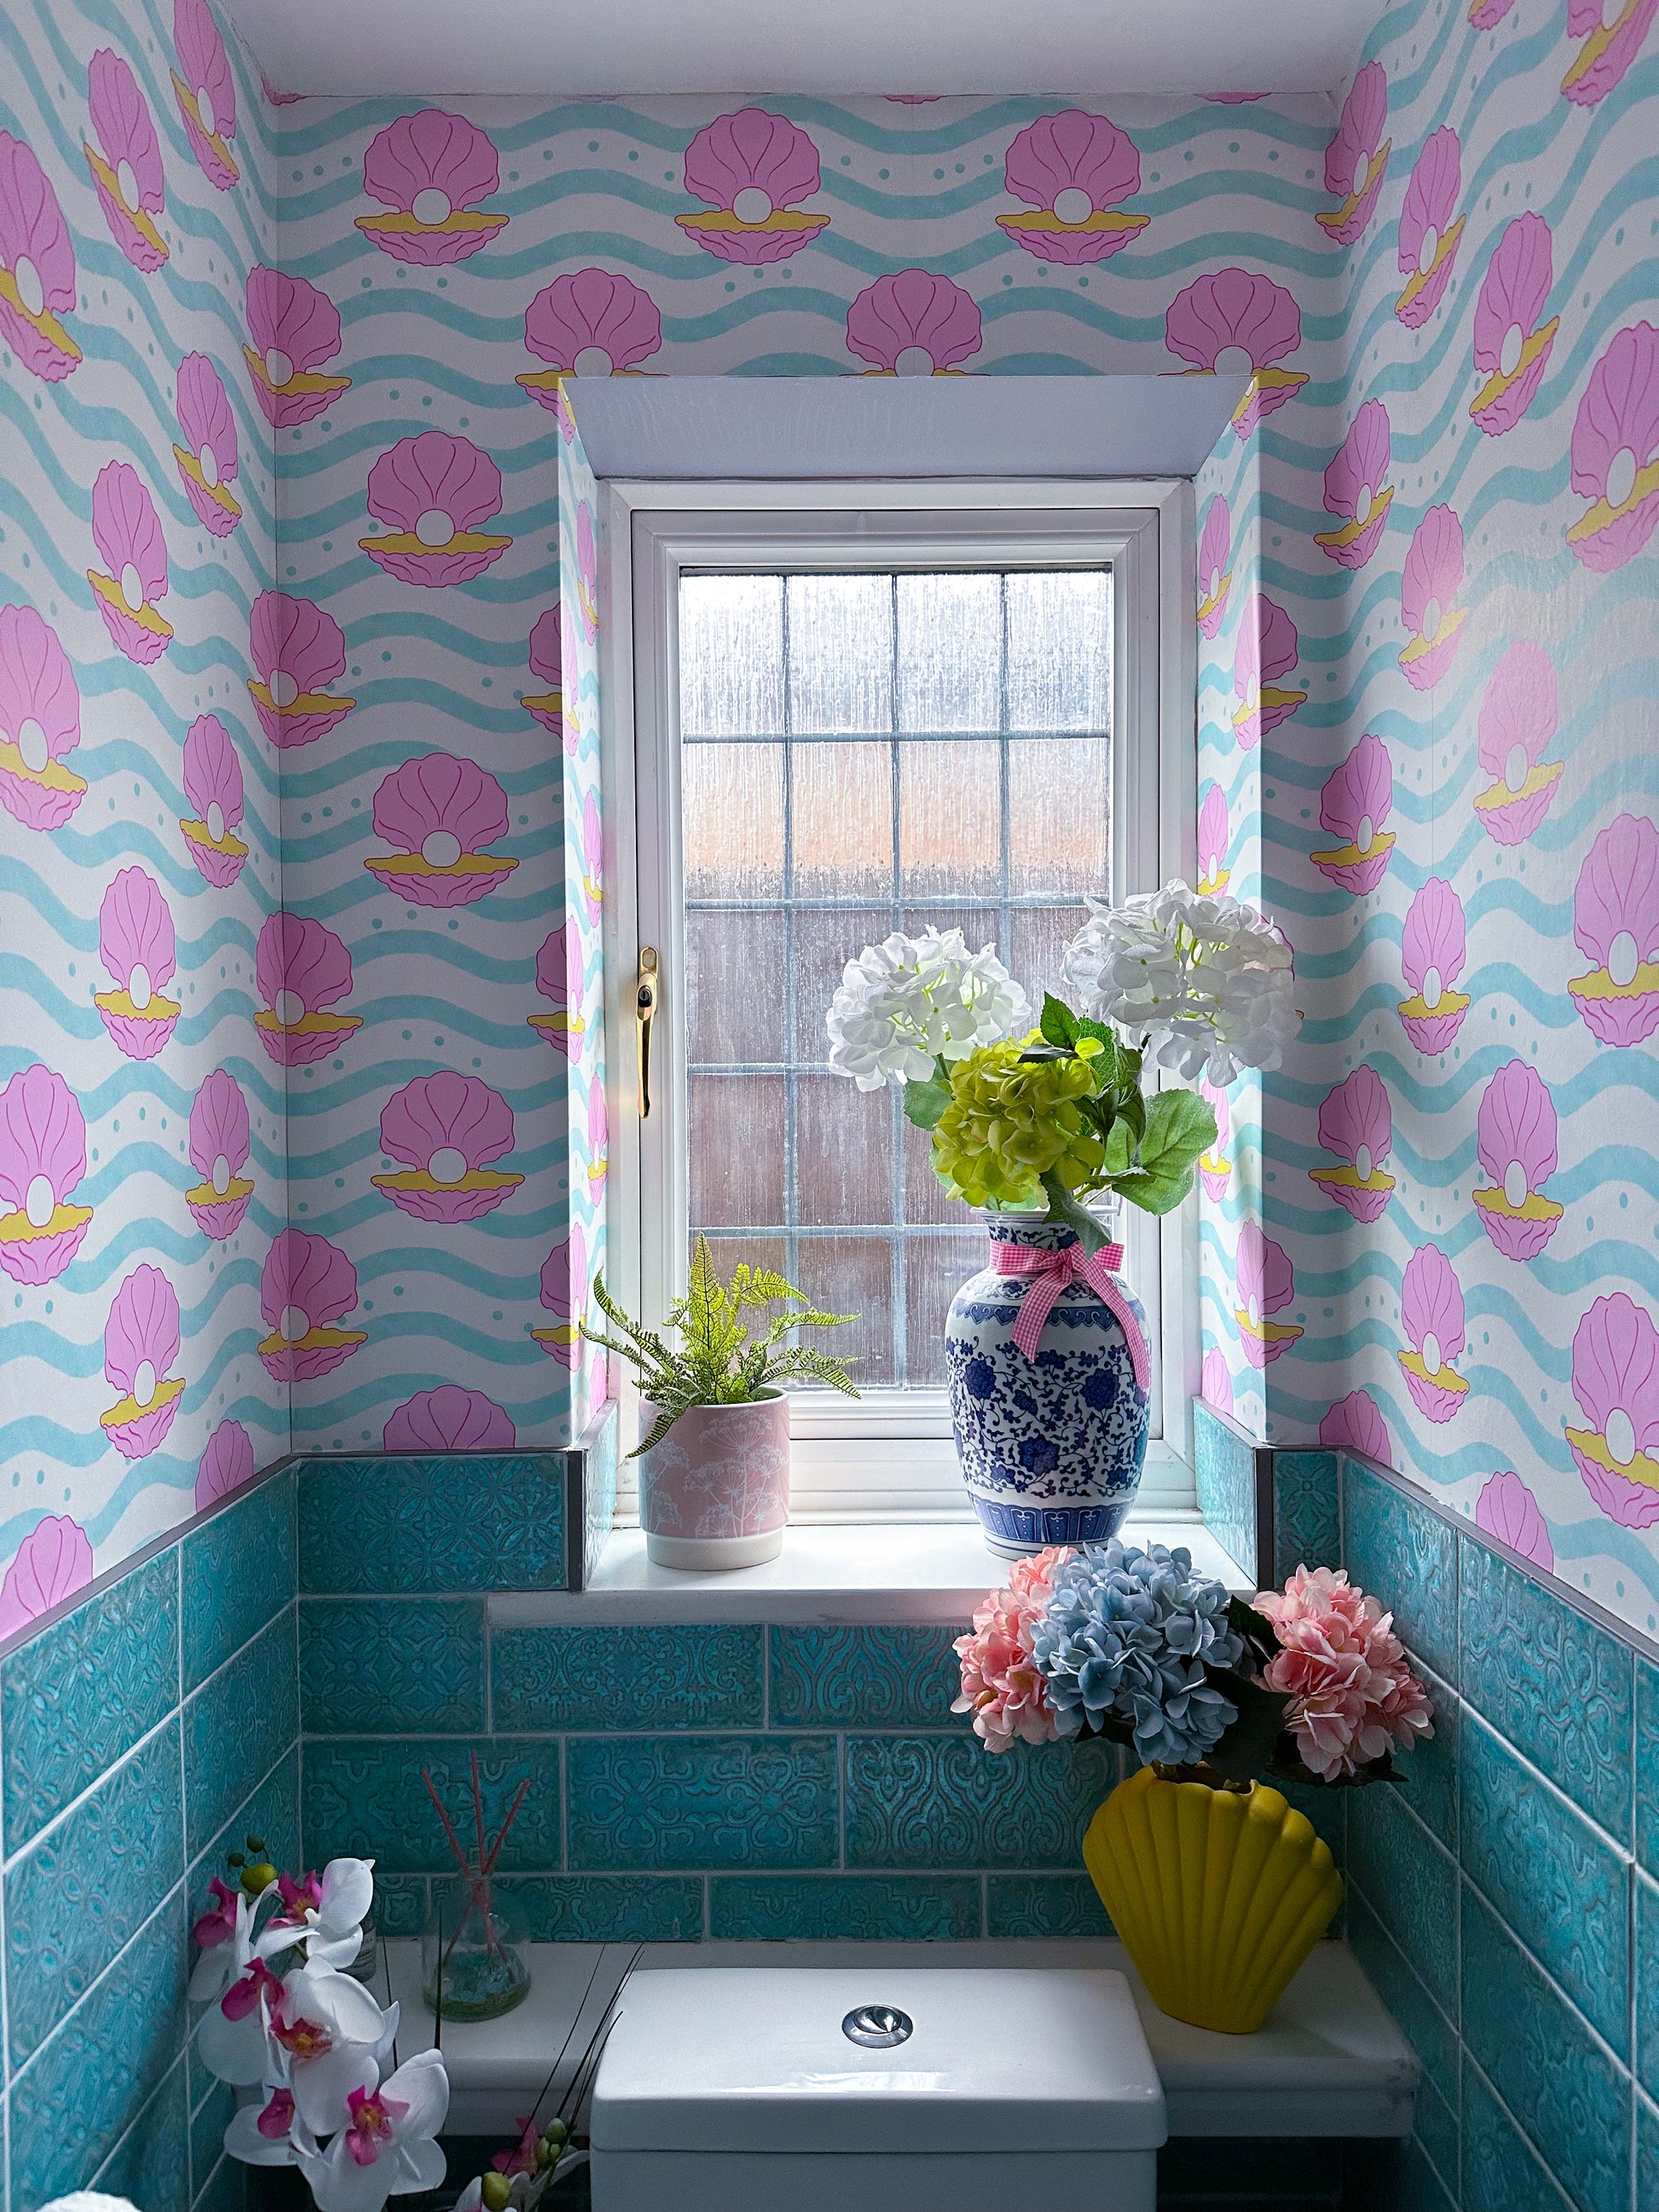 Bathroom wallpaper with clam shells in blue pink and yellow 